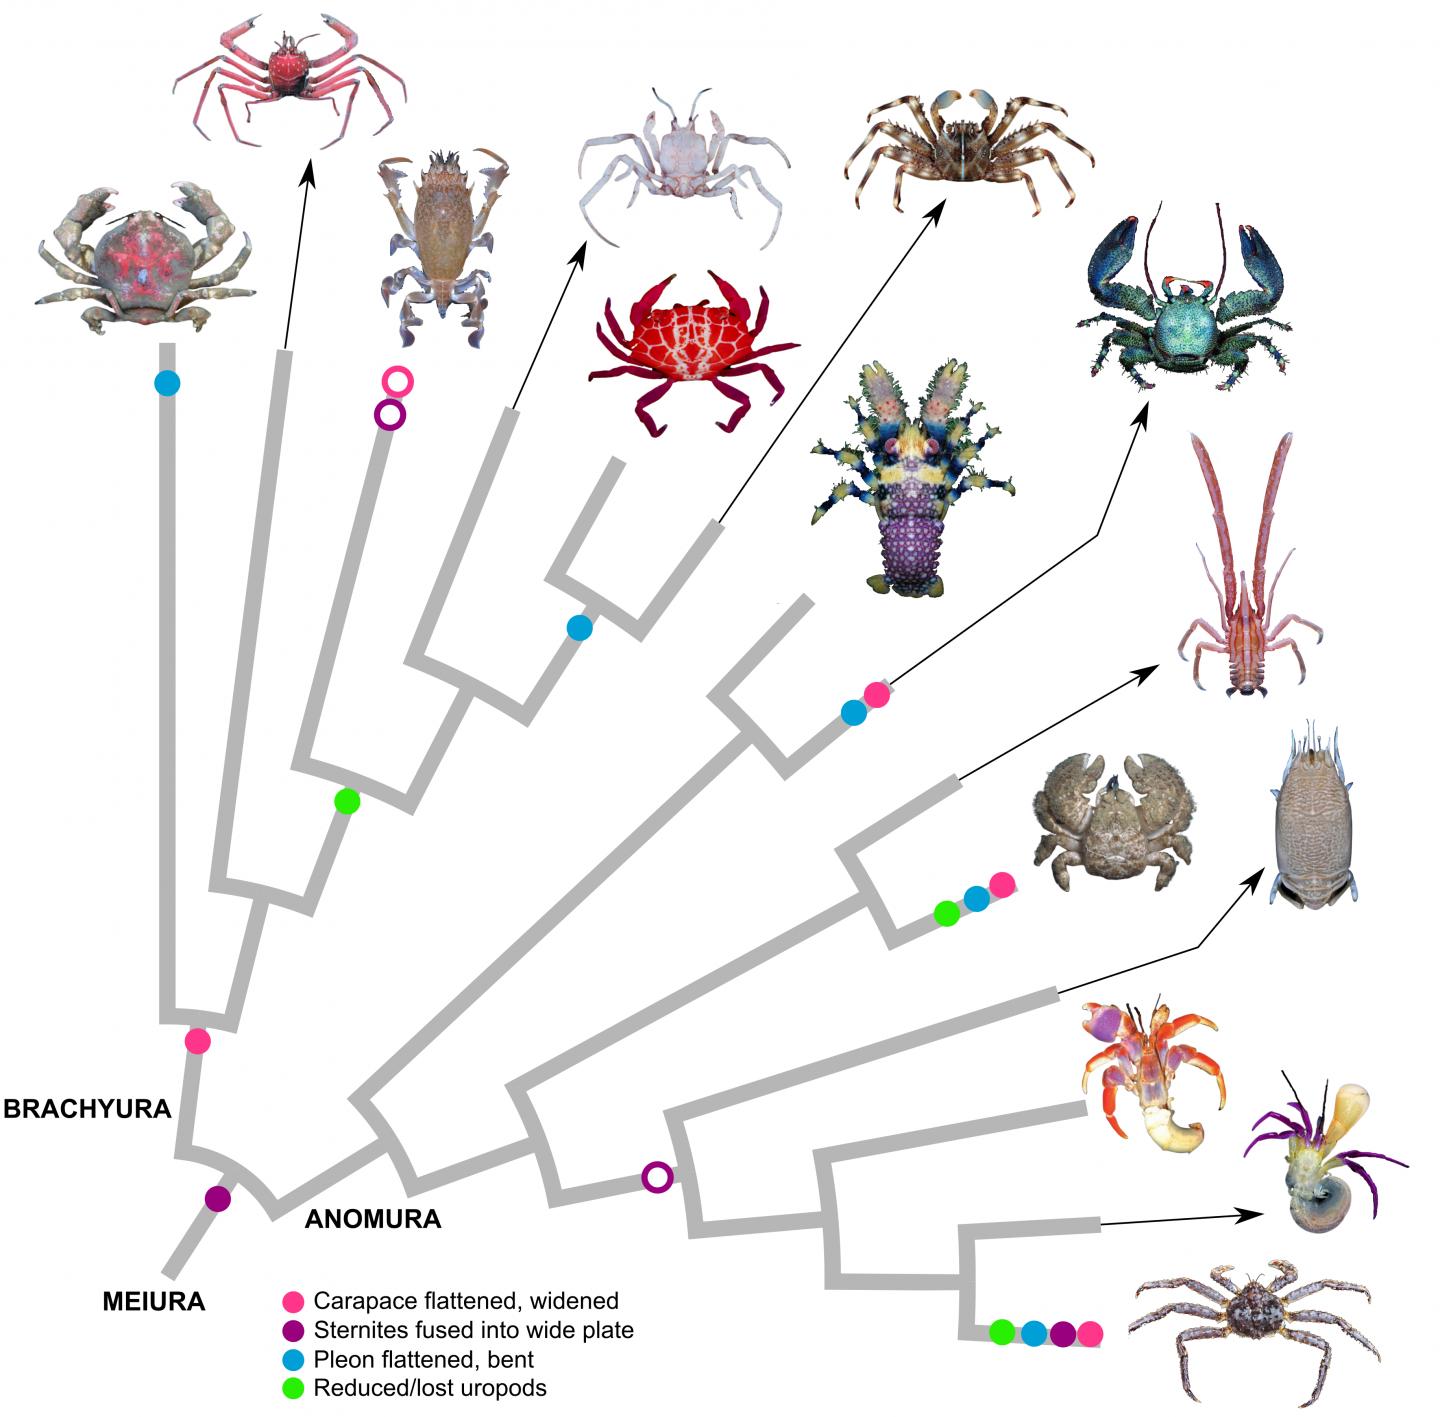 Taxonomic tree showing carcinated and decarcinated crab lineages